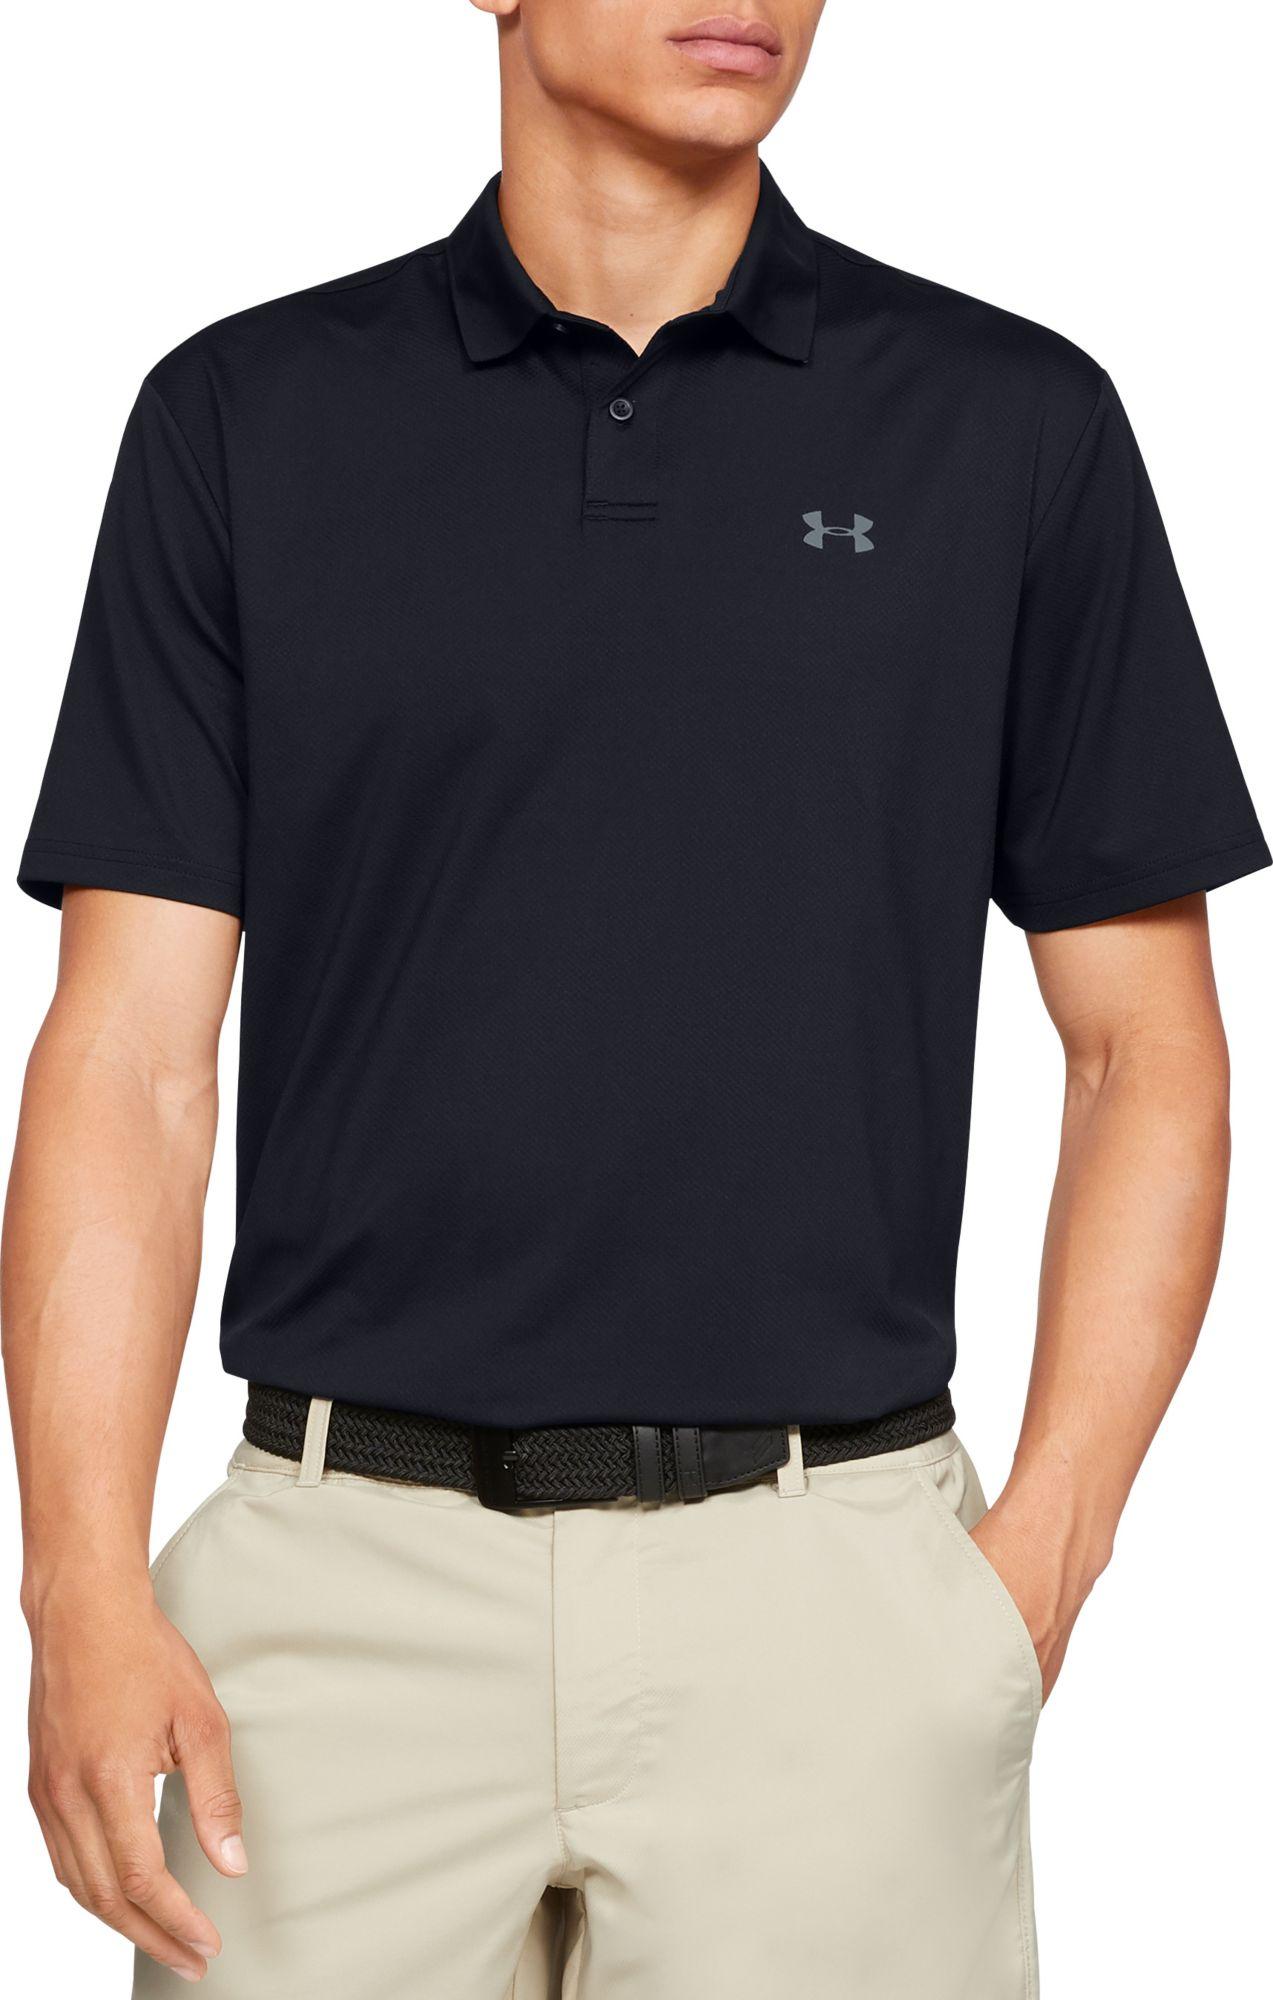 Under Armour Synthetic Performance 2.0 Golf Polo in Black for Men - Lyst